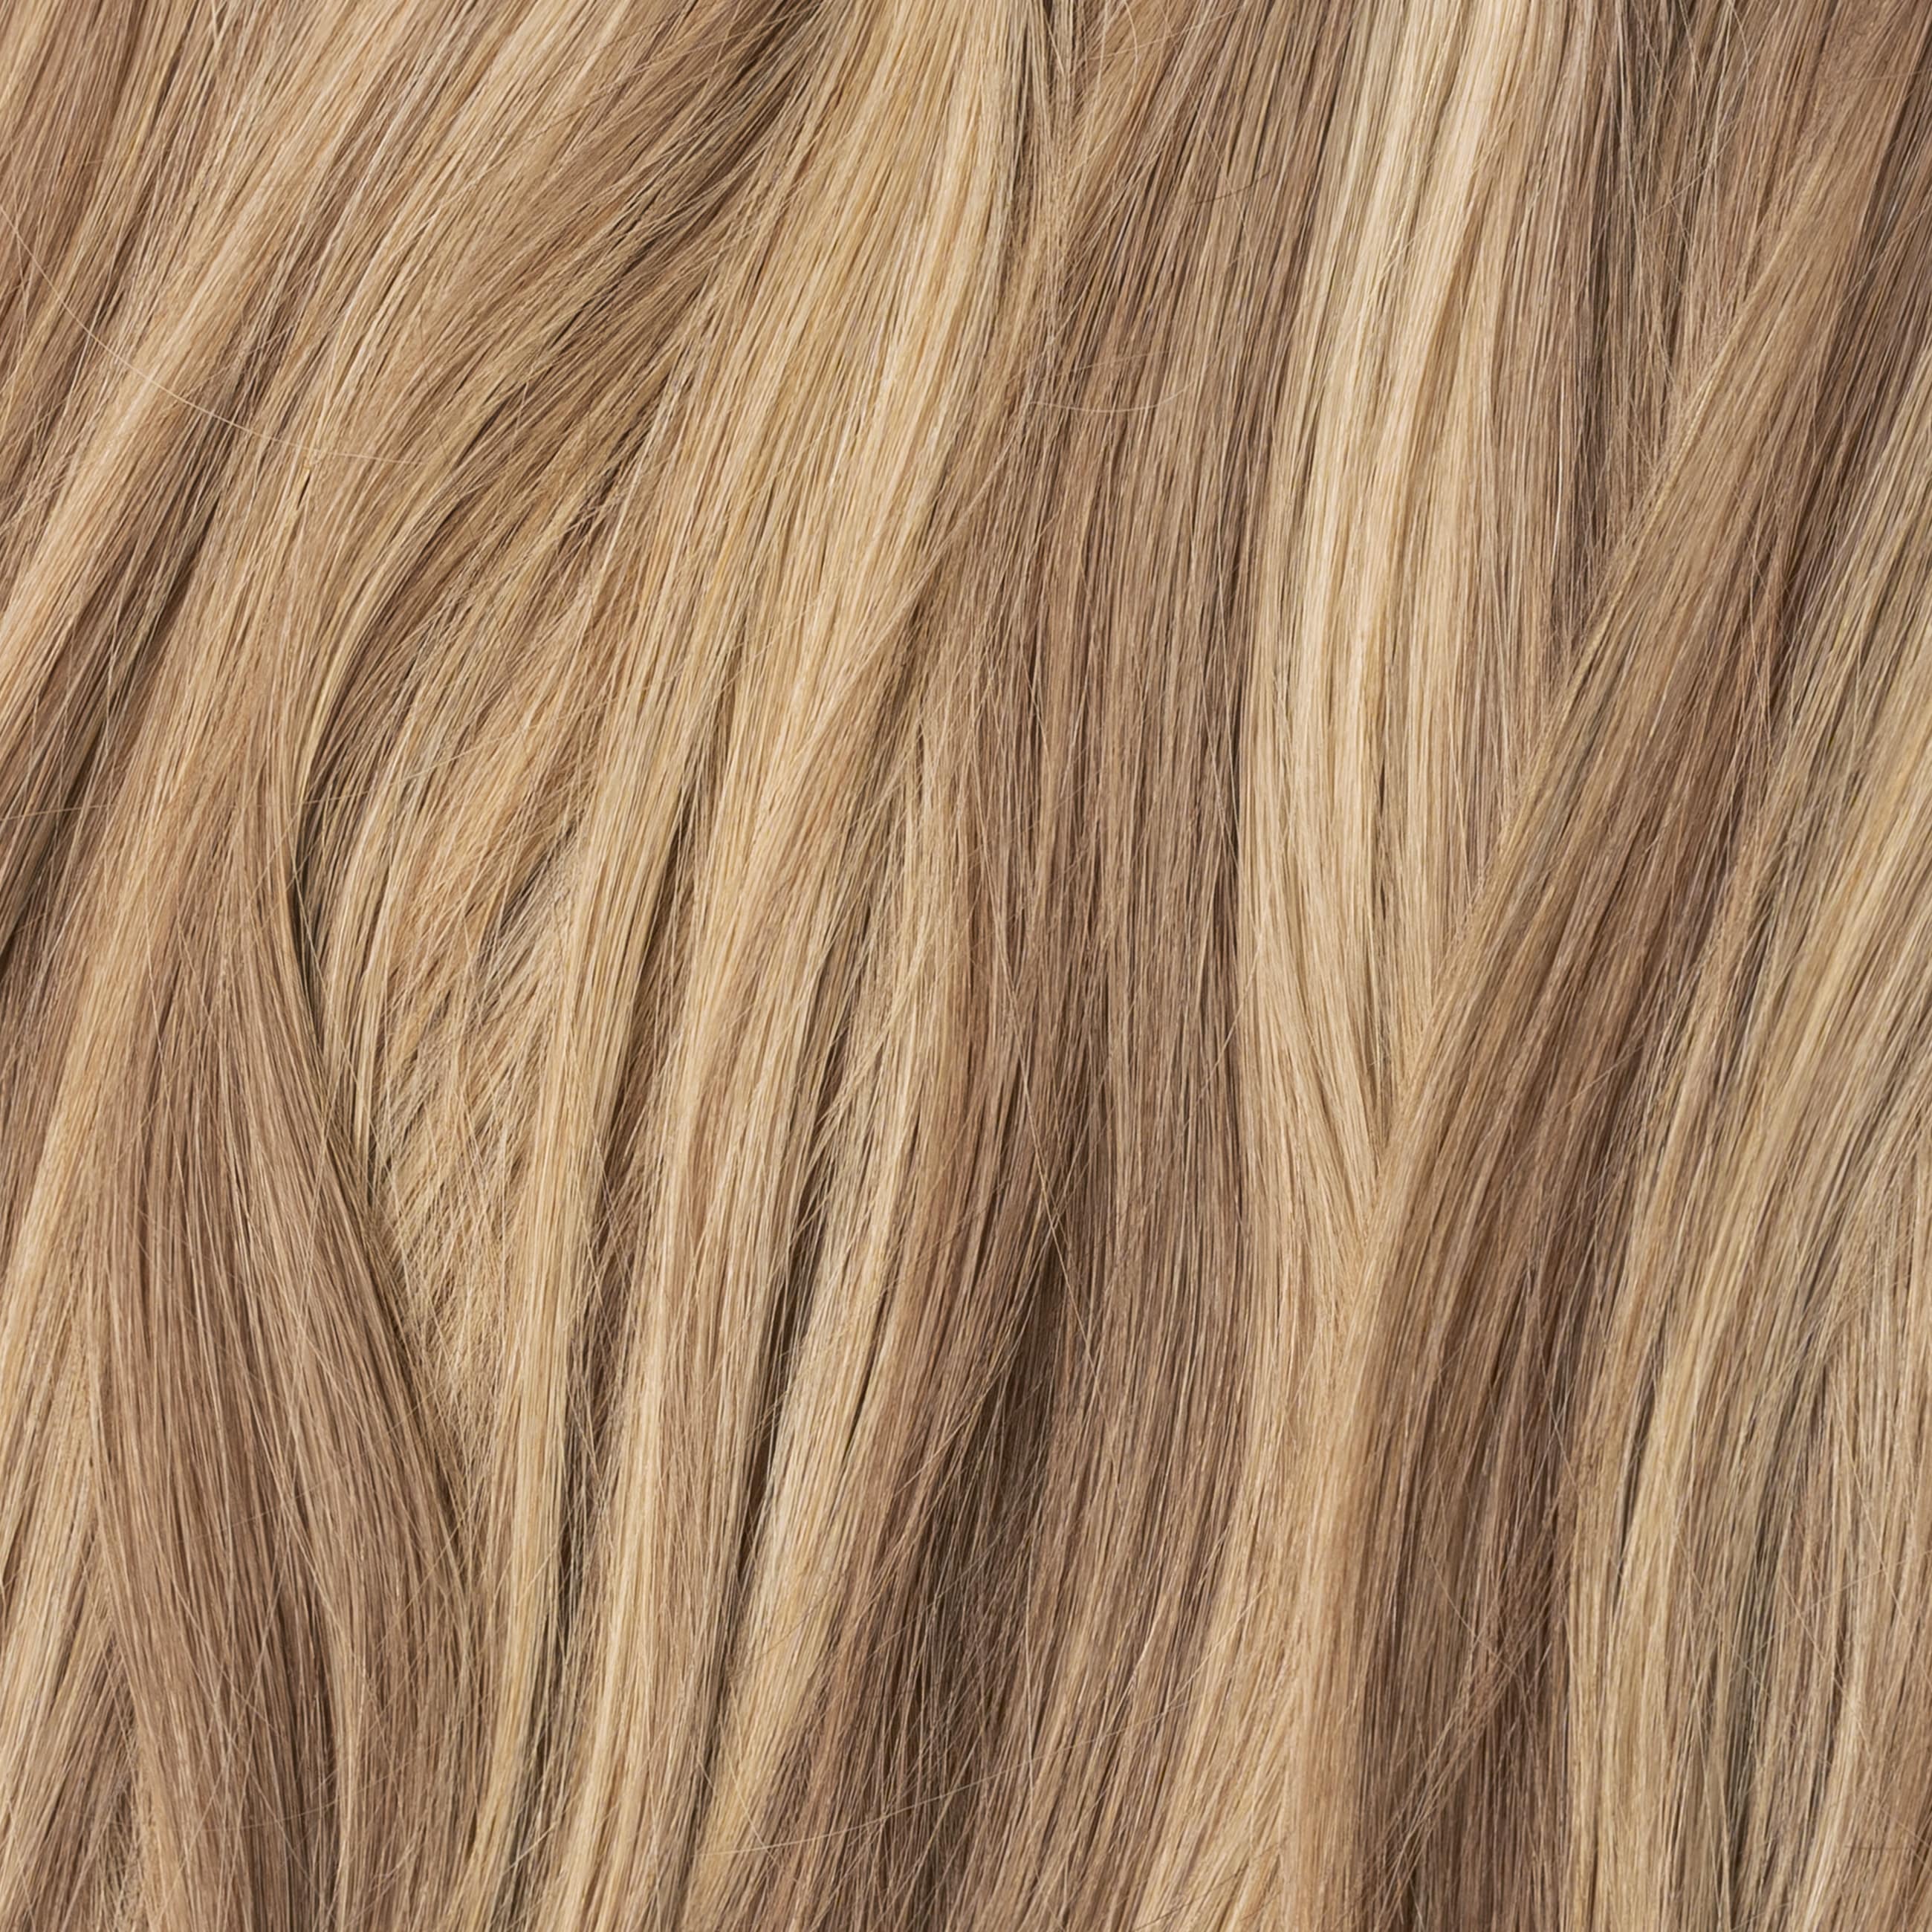 Halo hair extensions - Mix nr. 5B/15